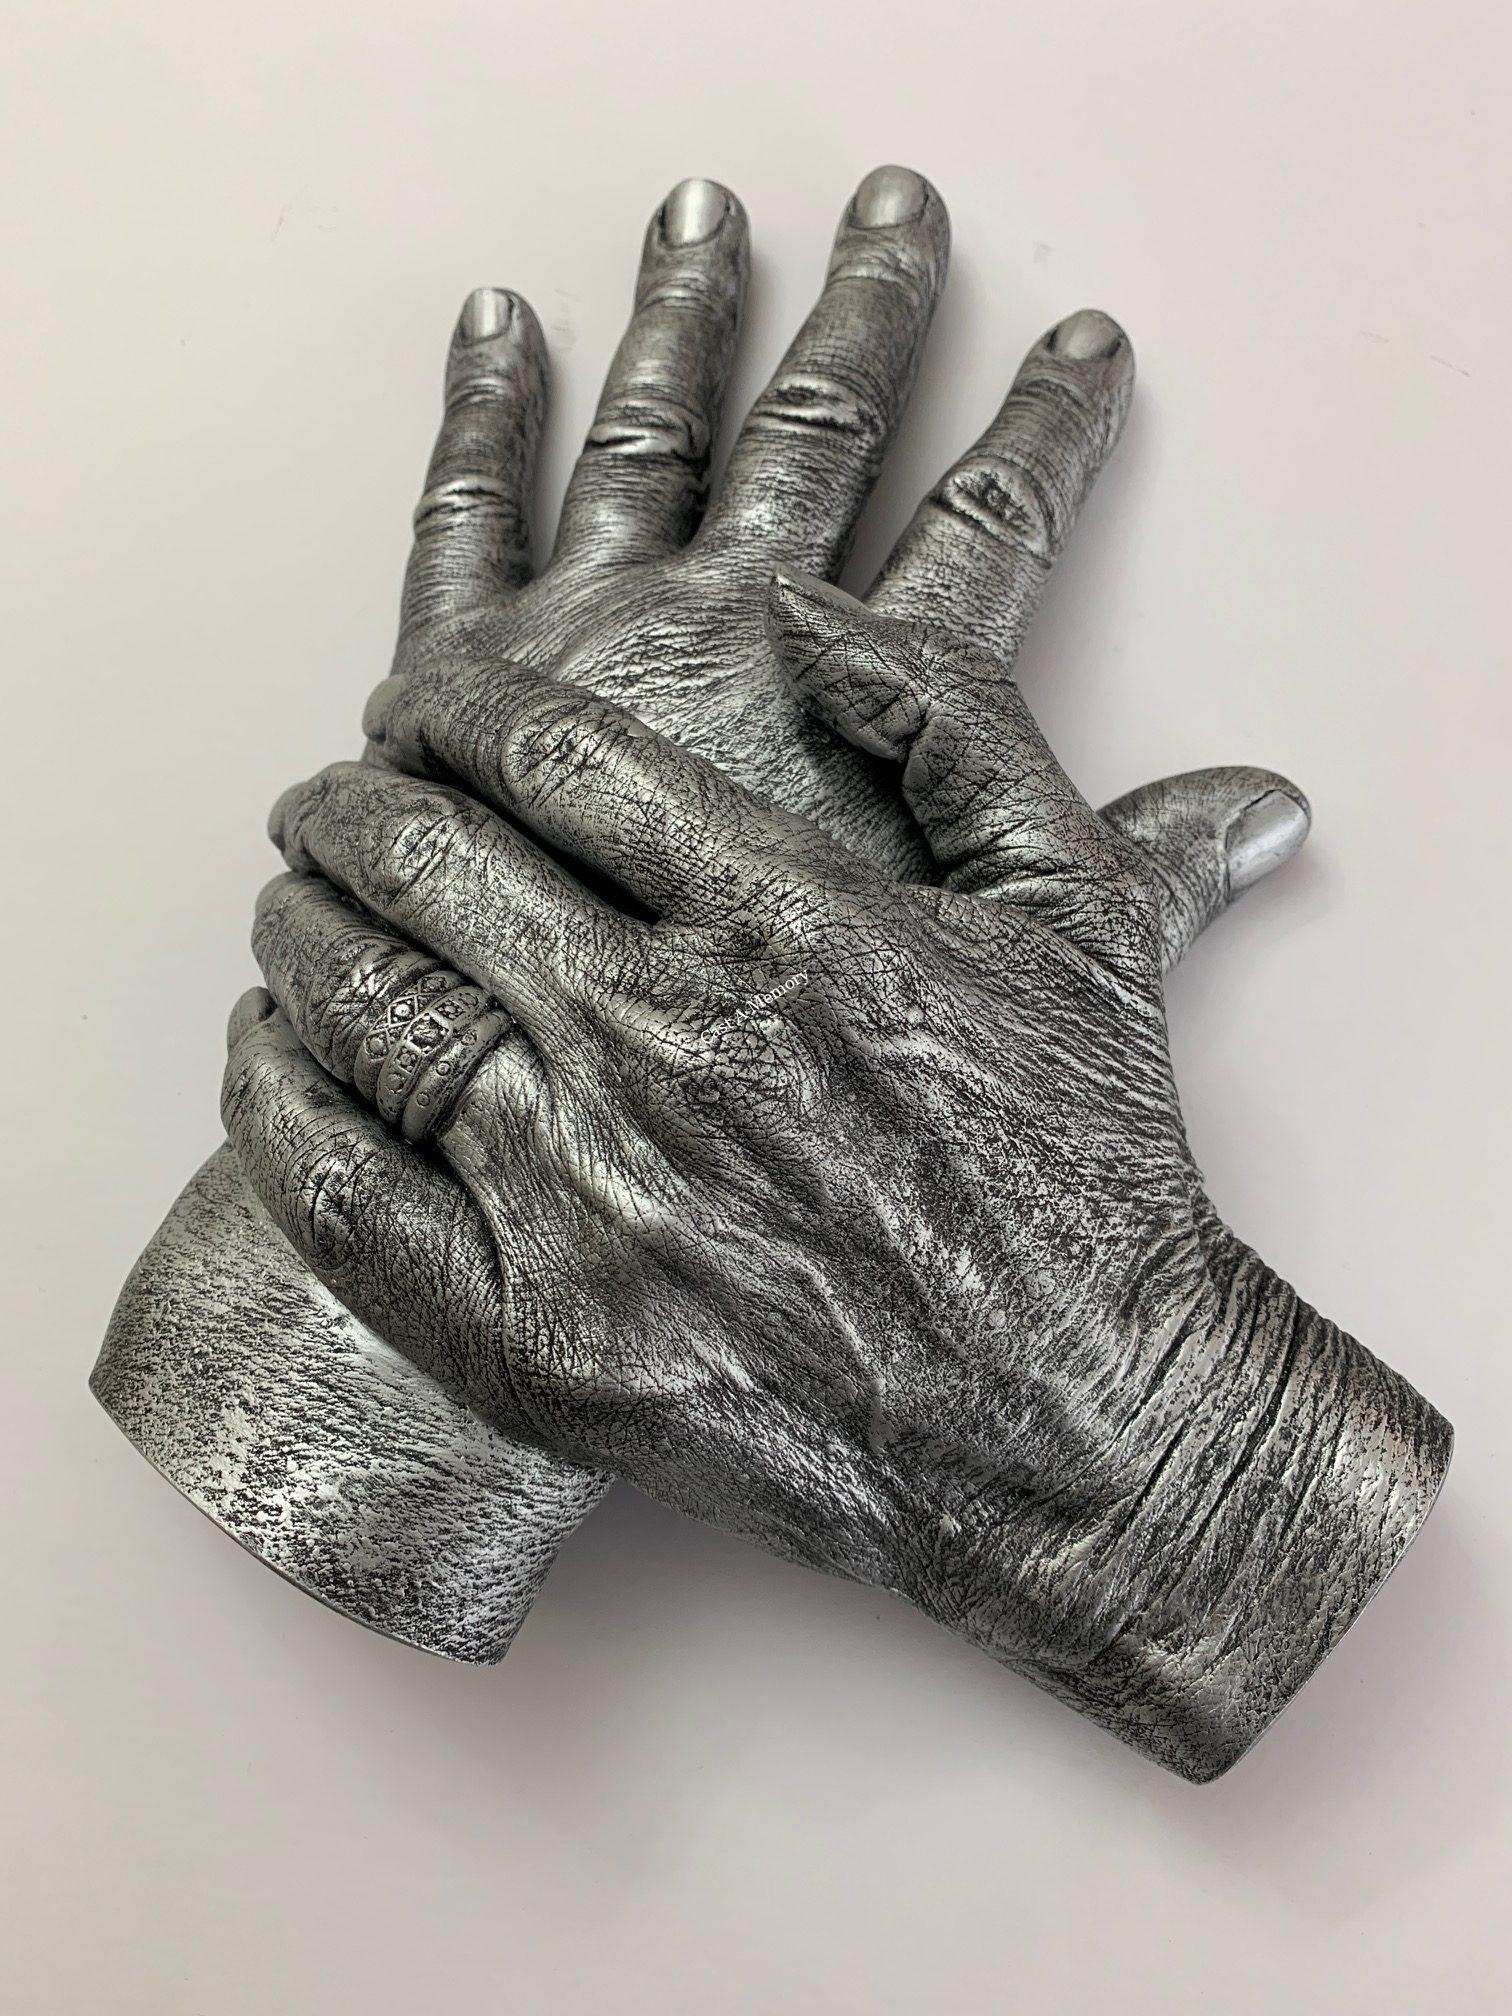 flat horizontal family life cast showing two hands with rings